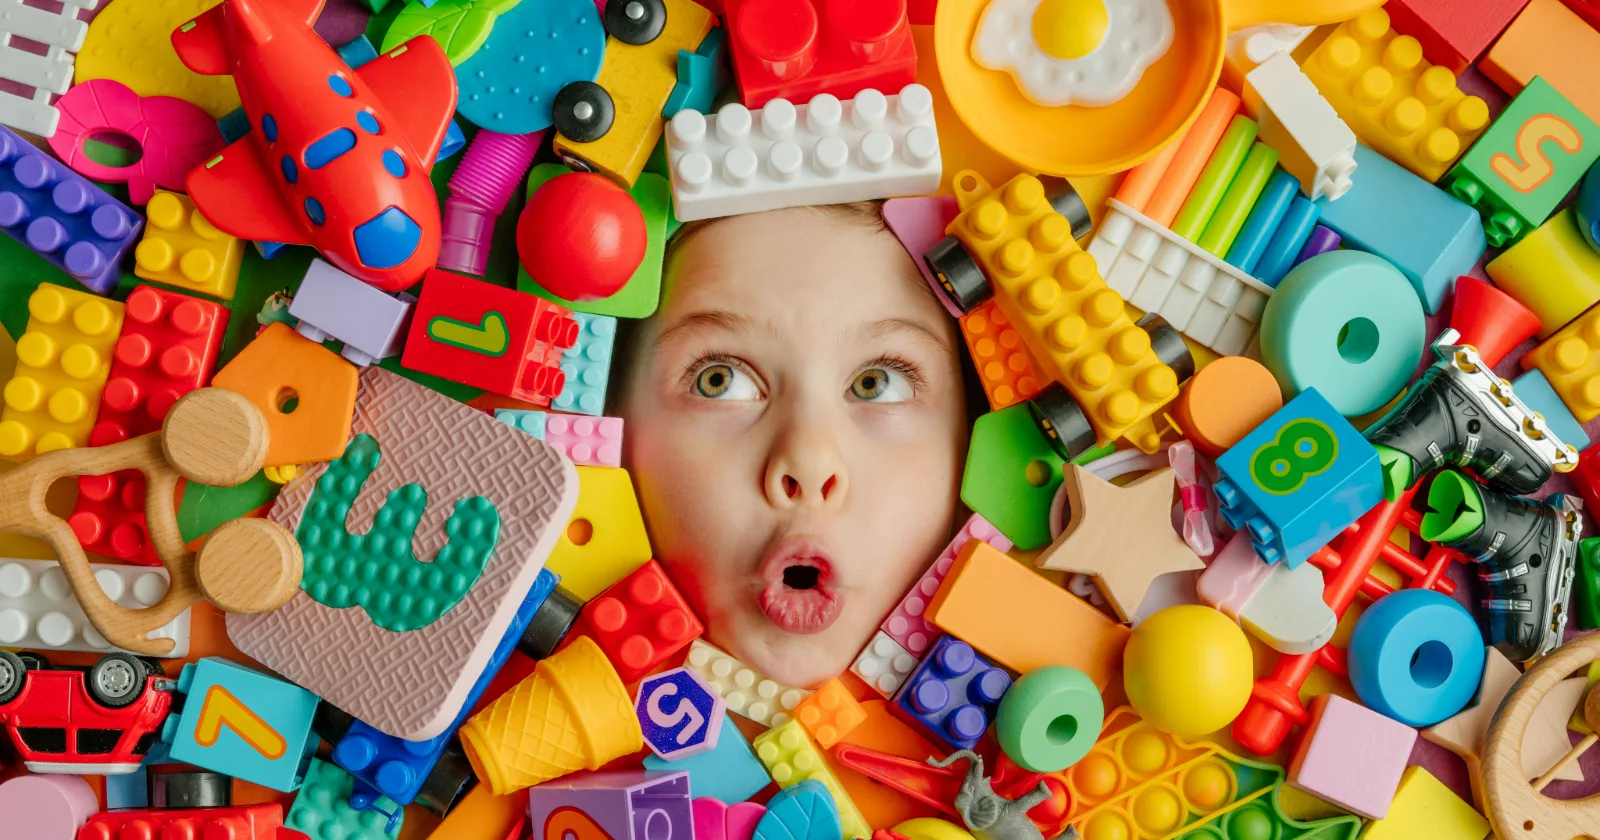 Kid's face surrounded by building blocks.